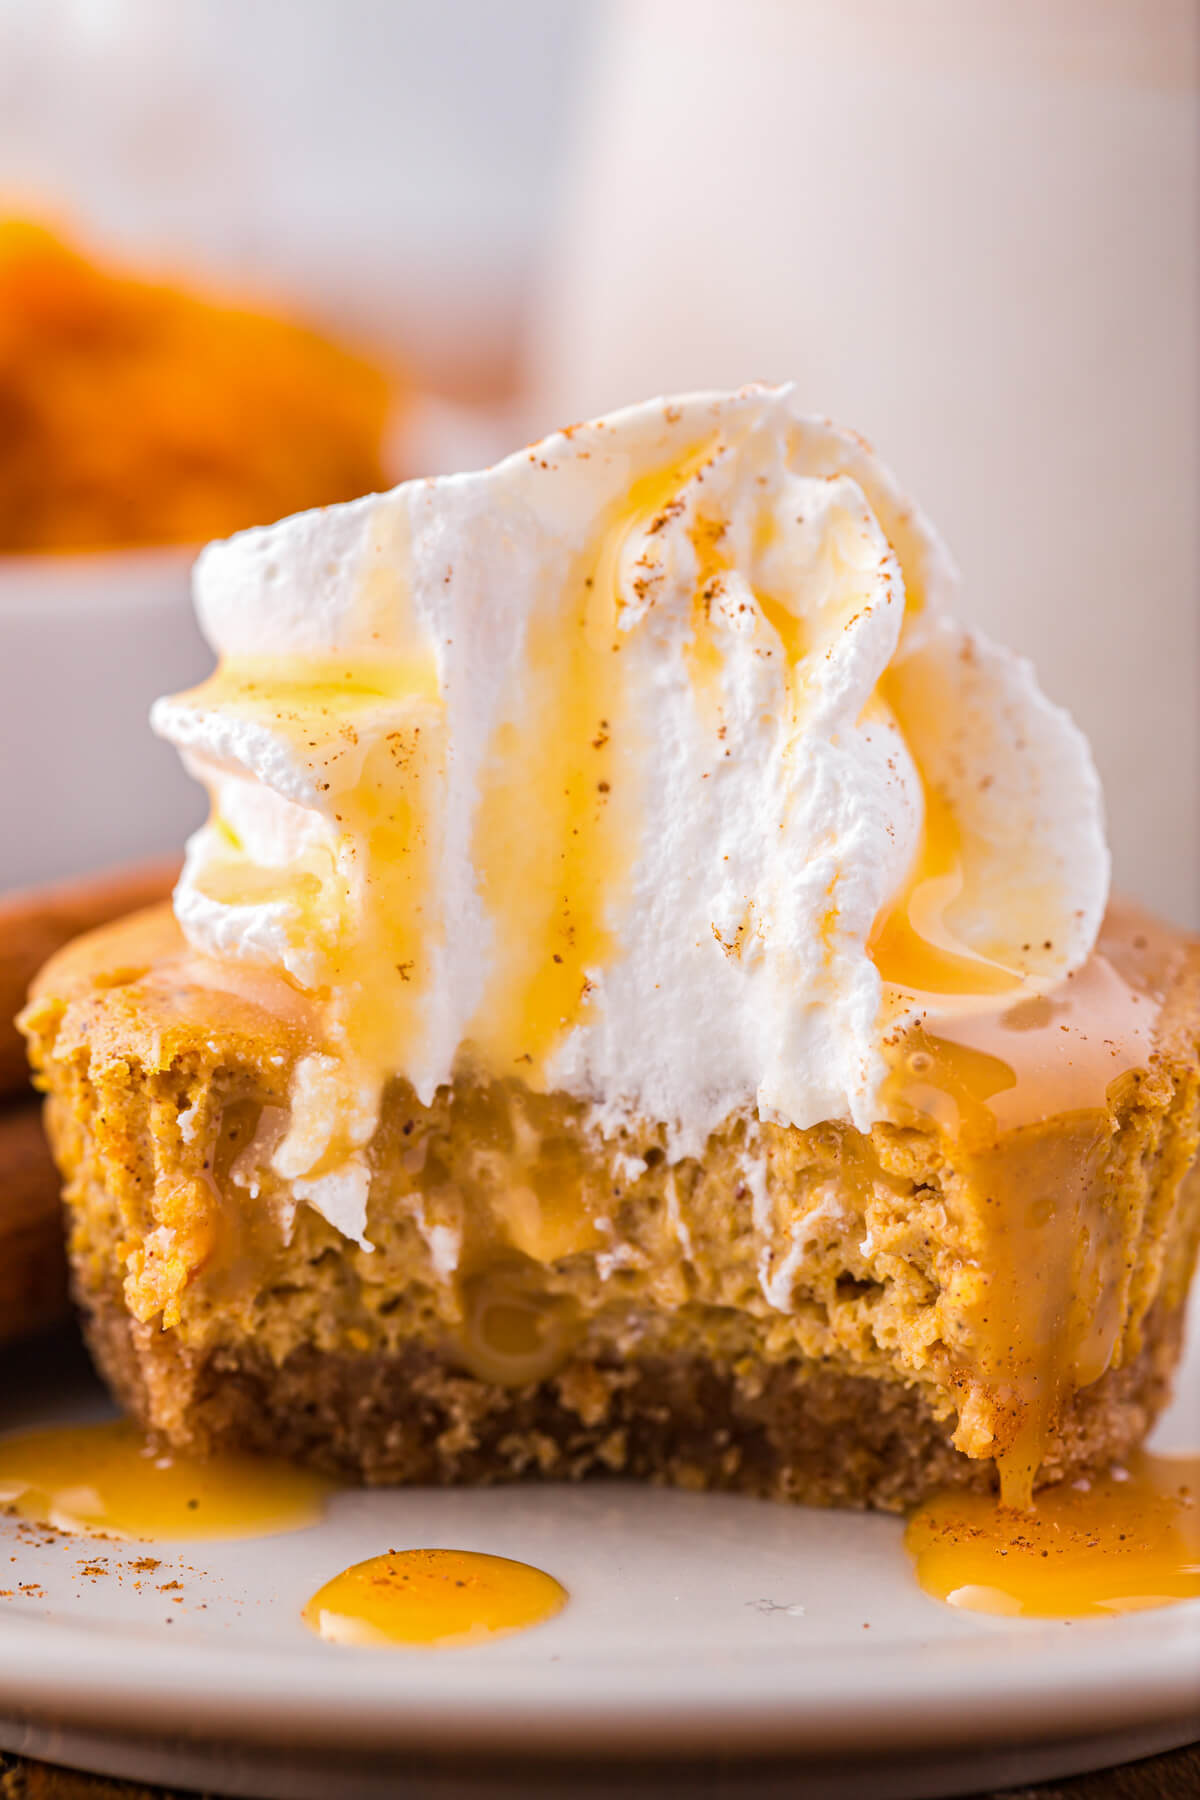 A whipped cream topped mini pumpkin cheesecake with a bite taken out and dripping with caramel sauce.